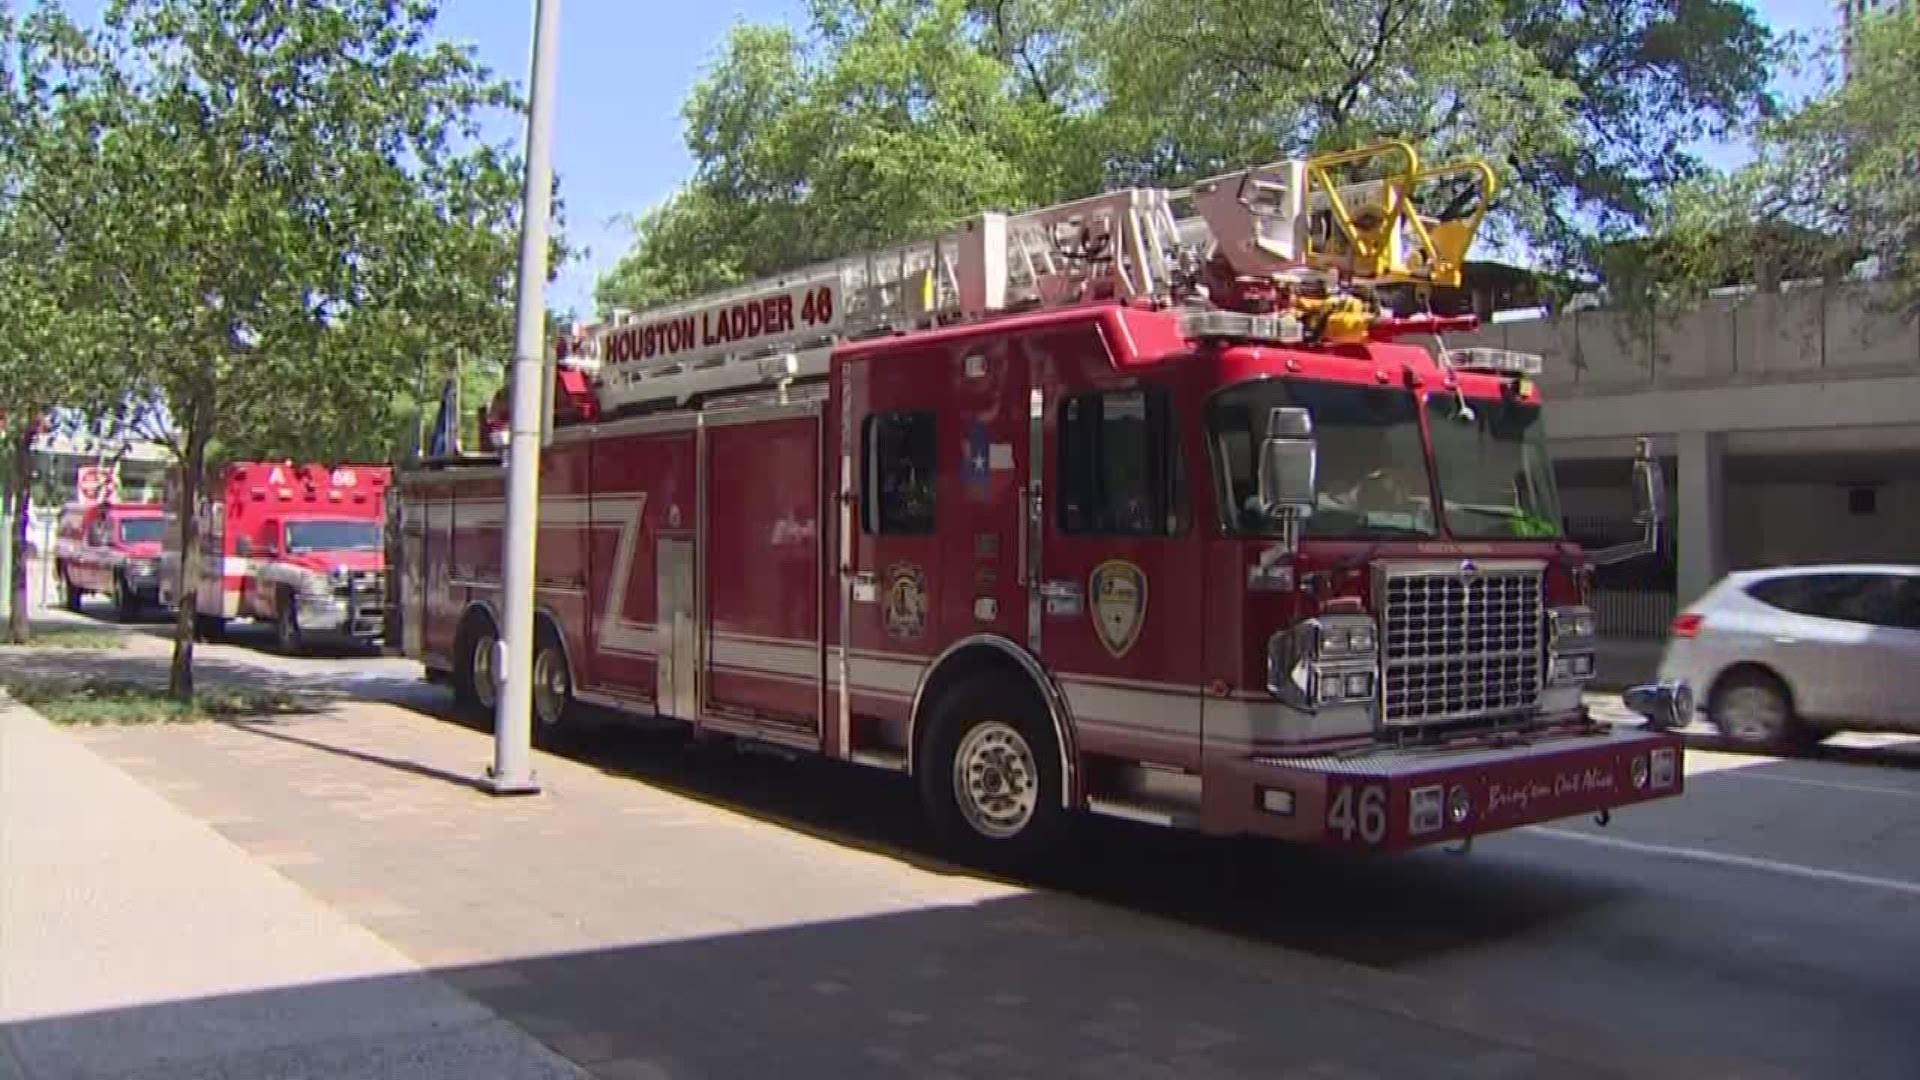 Dozens of Houston Fire Department vehicles were taken out of service Thursday so firefighters who received layoff notices could meet with the chief.

Some 220 firefighters are being called to HFD’s downtown headquarters for the meetings.

HFD sources tell us firefighters who are on duty are not allowed to use their personal vehicles while on the clock, so they have to take HFD trucks downtown.